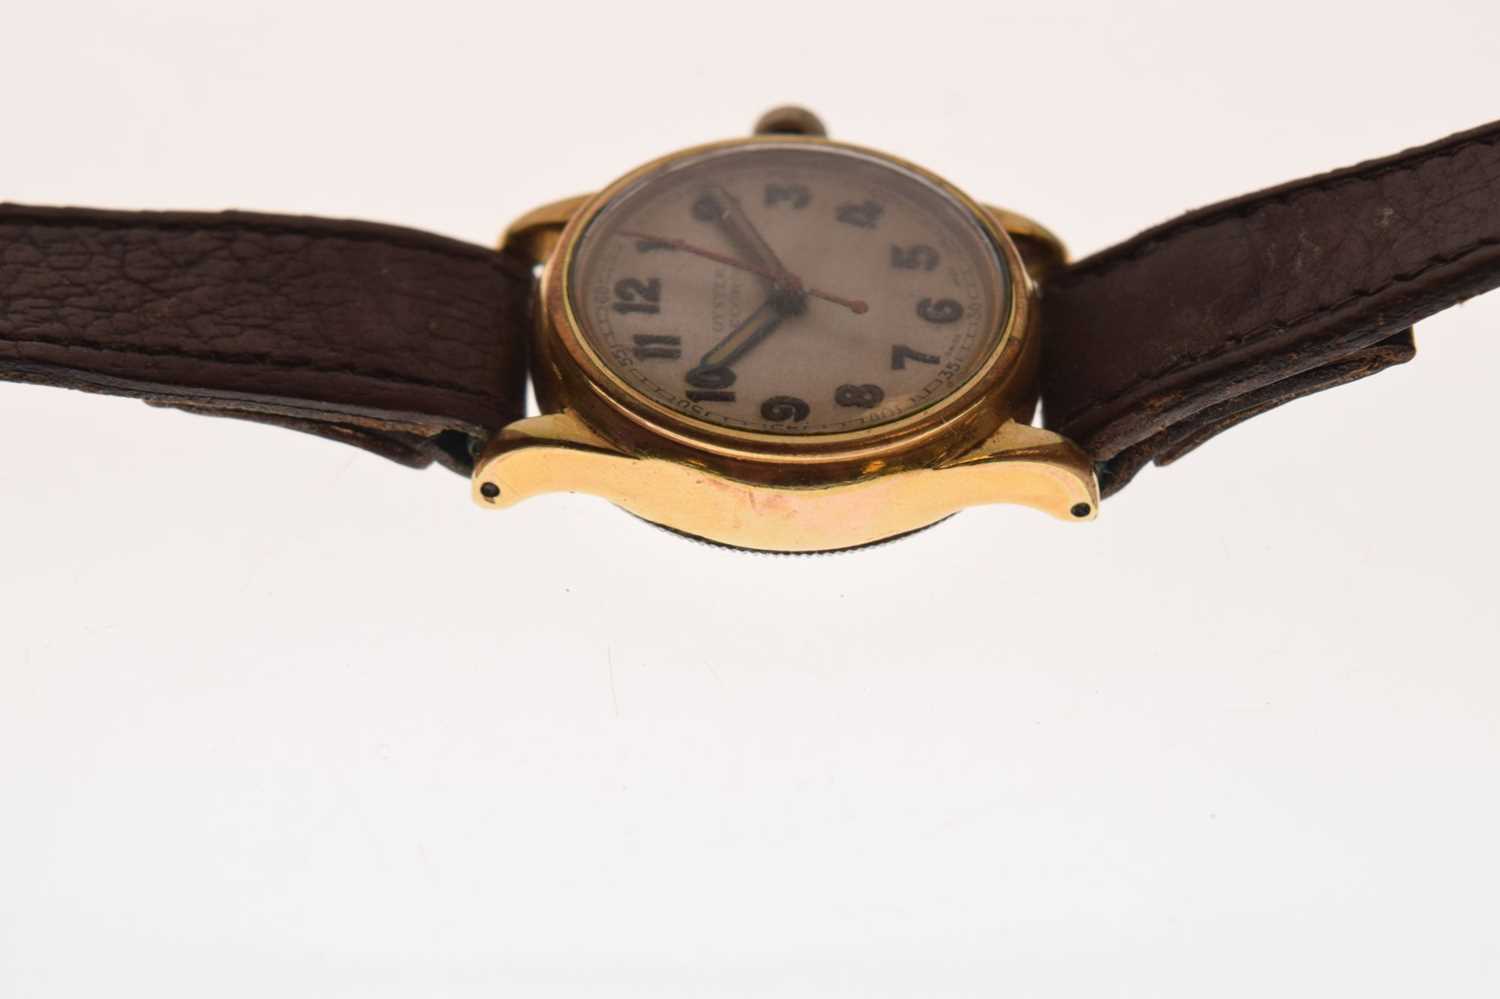 Rolex - 1940s Oyster Recorda manual wind wristwatch - Image 3 of 10